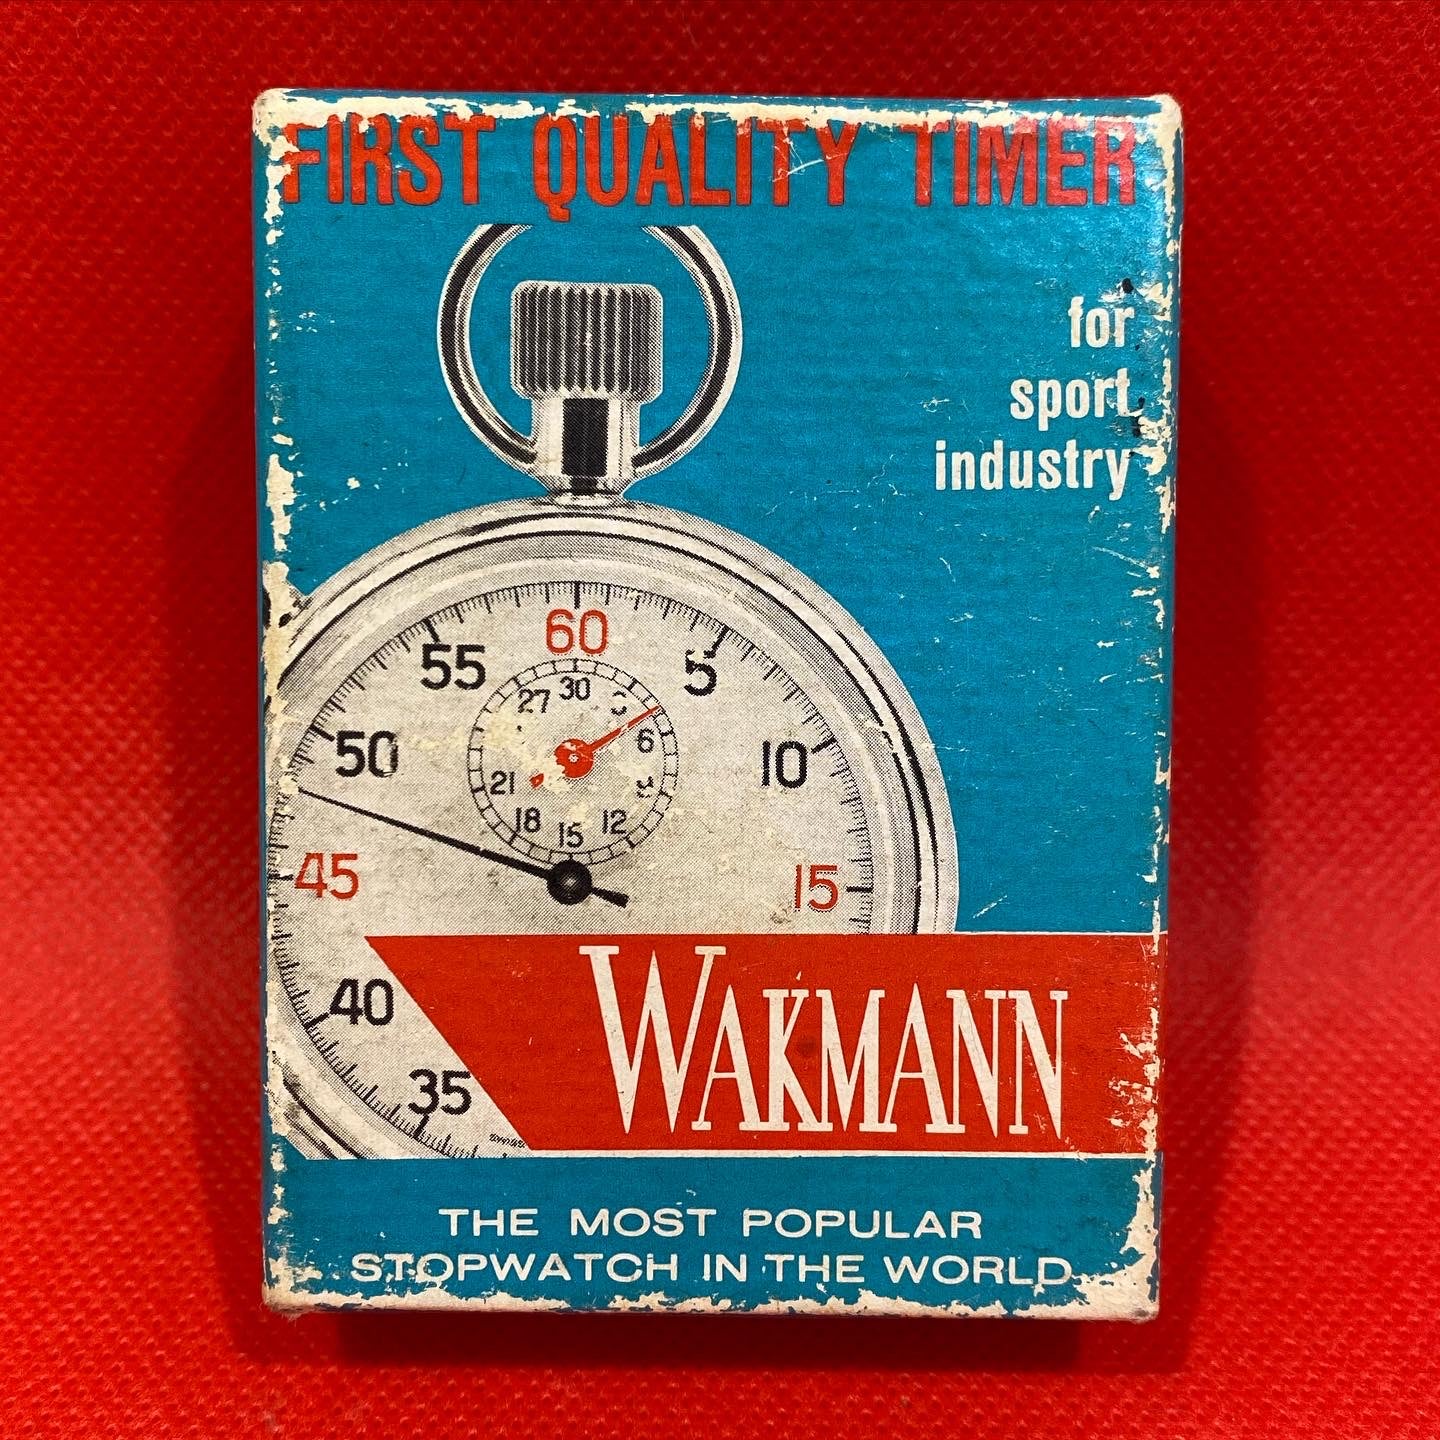 Rare Vintage Swiss made Breitling Wakmann 1/10 stop watch. New with original box. Works fine.